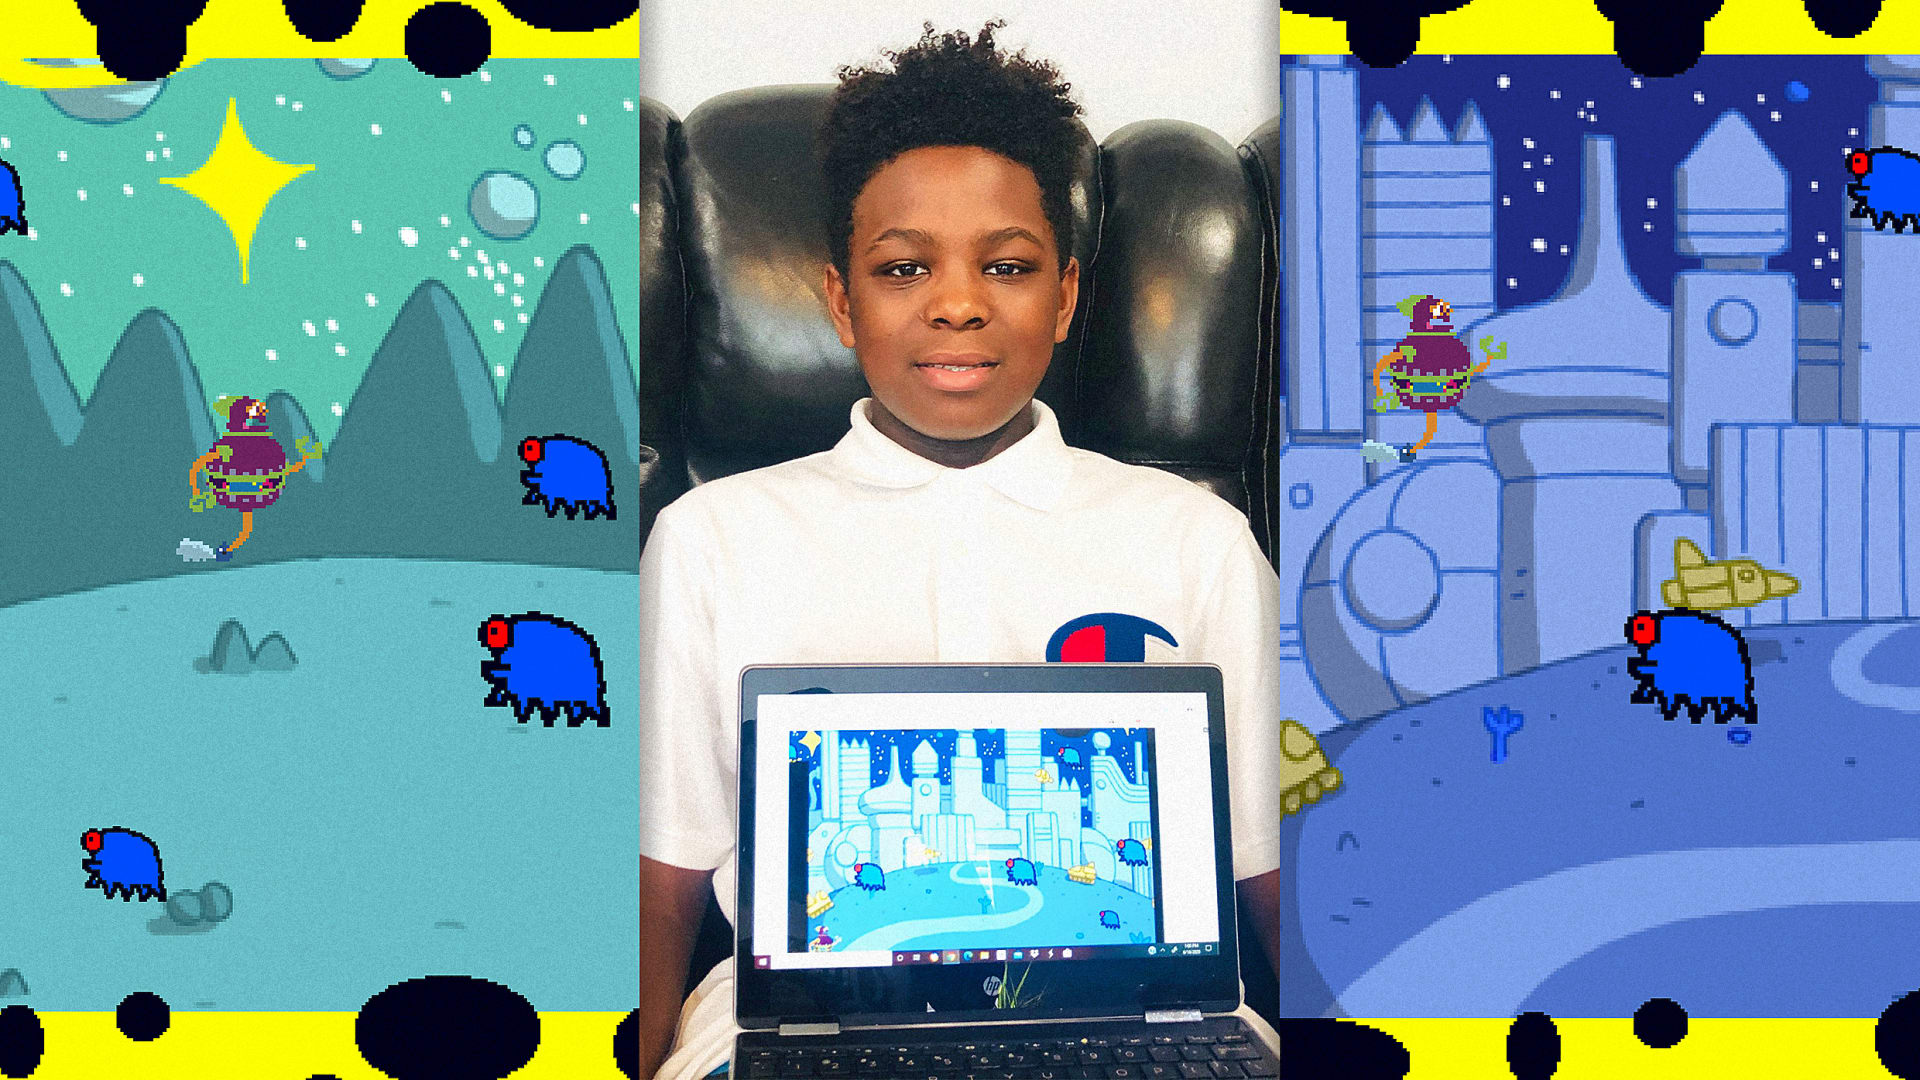 This sixth grader reinvented a classic video game to combat the stress of COVID-19